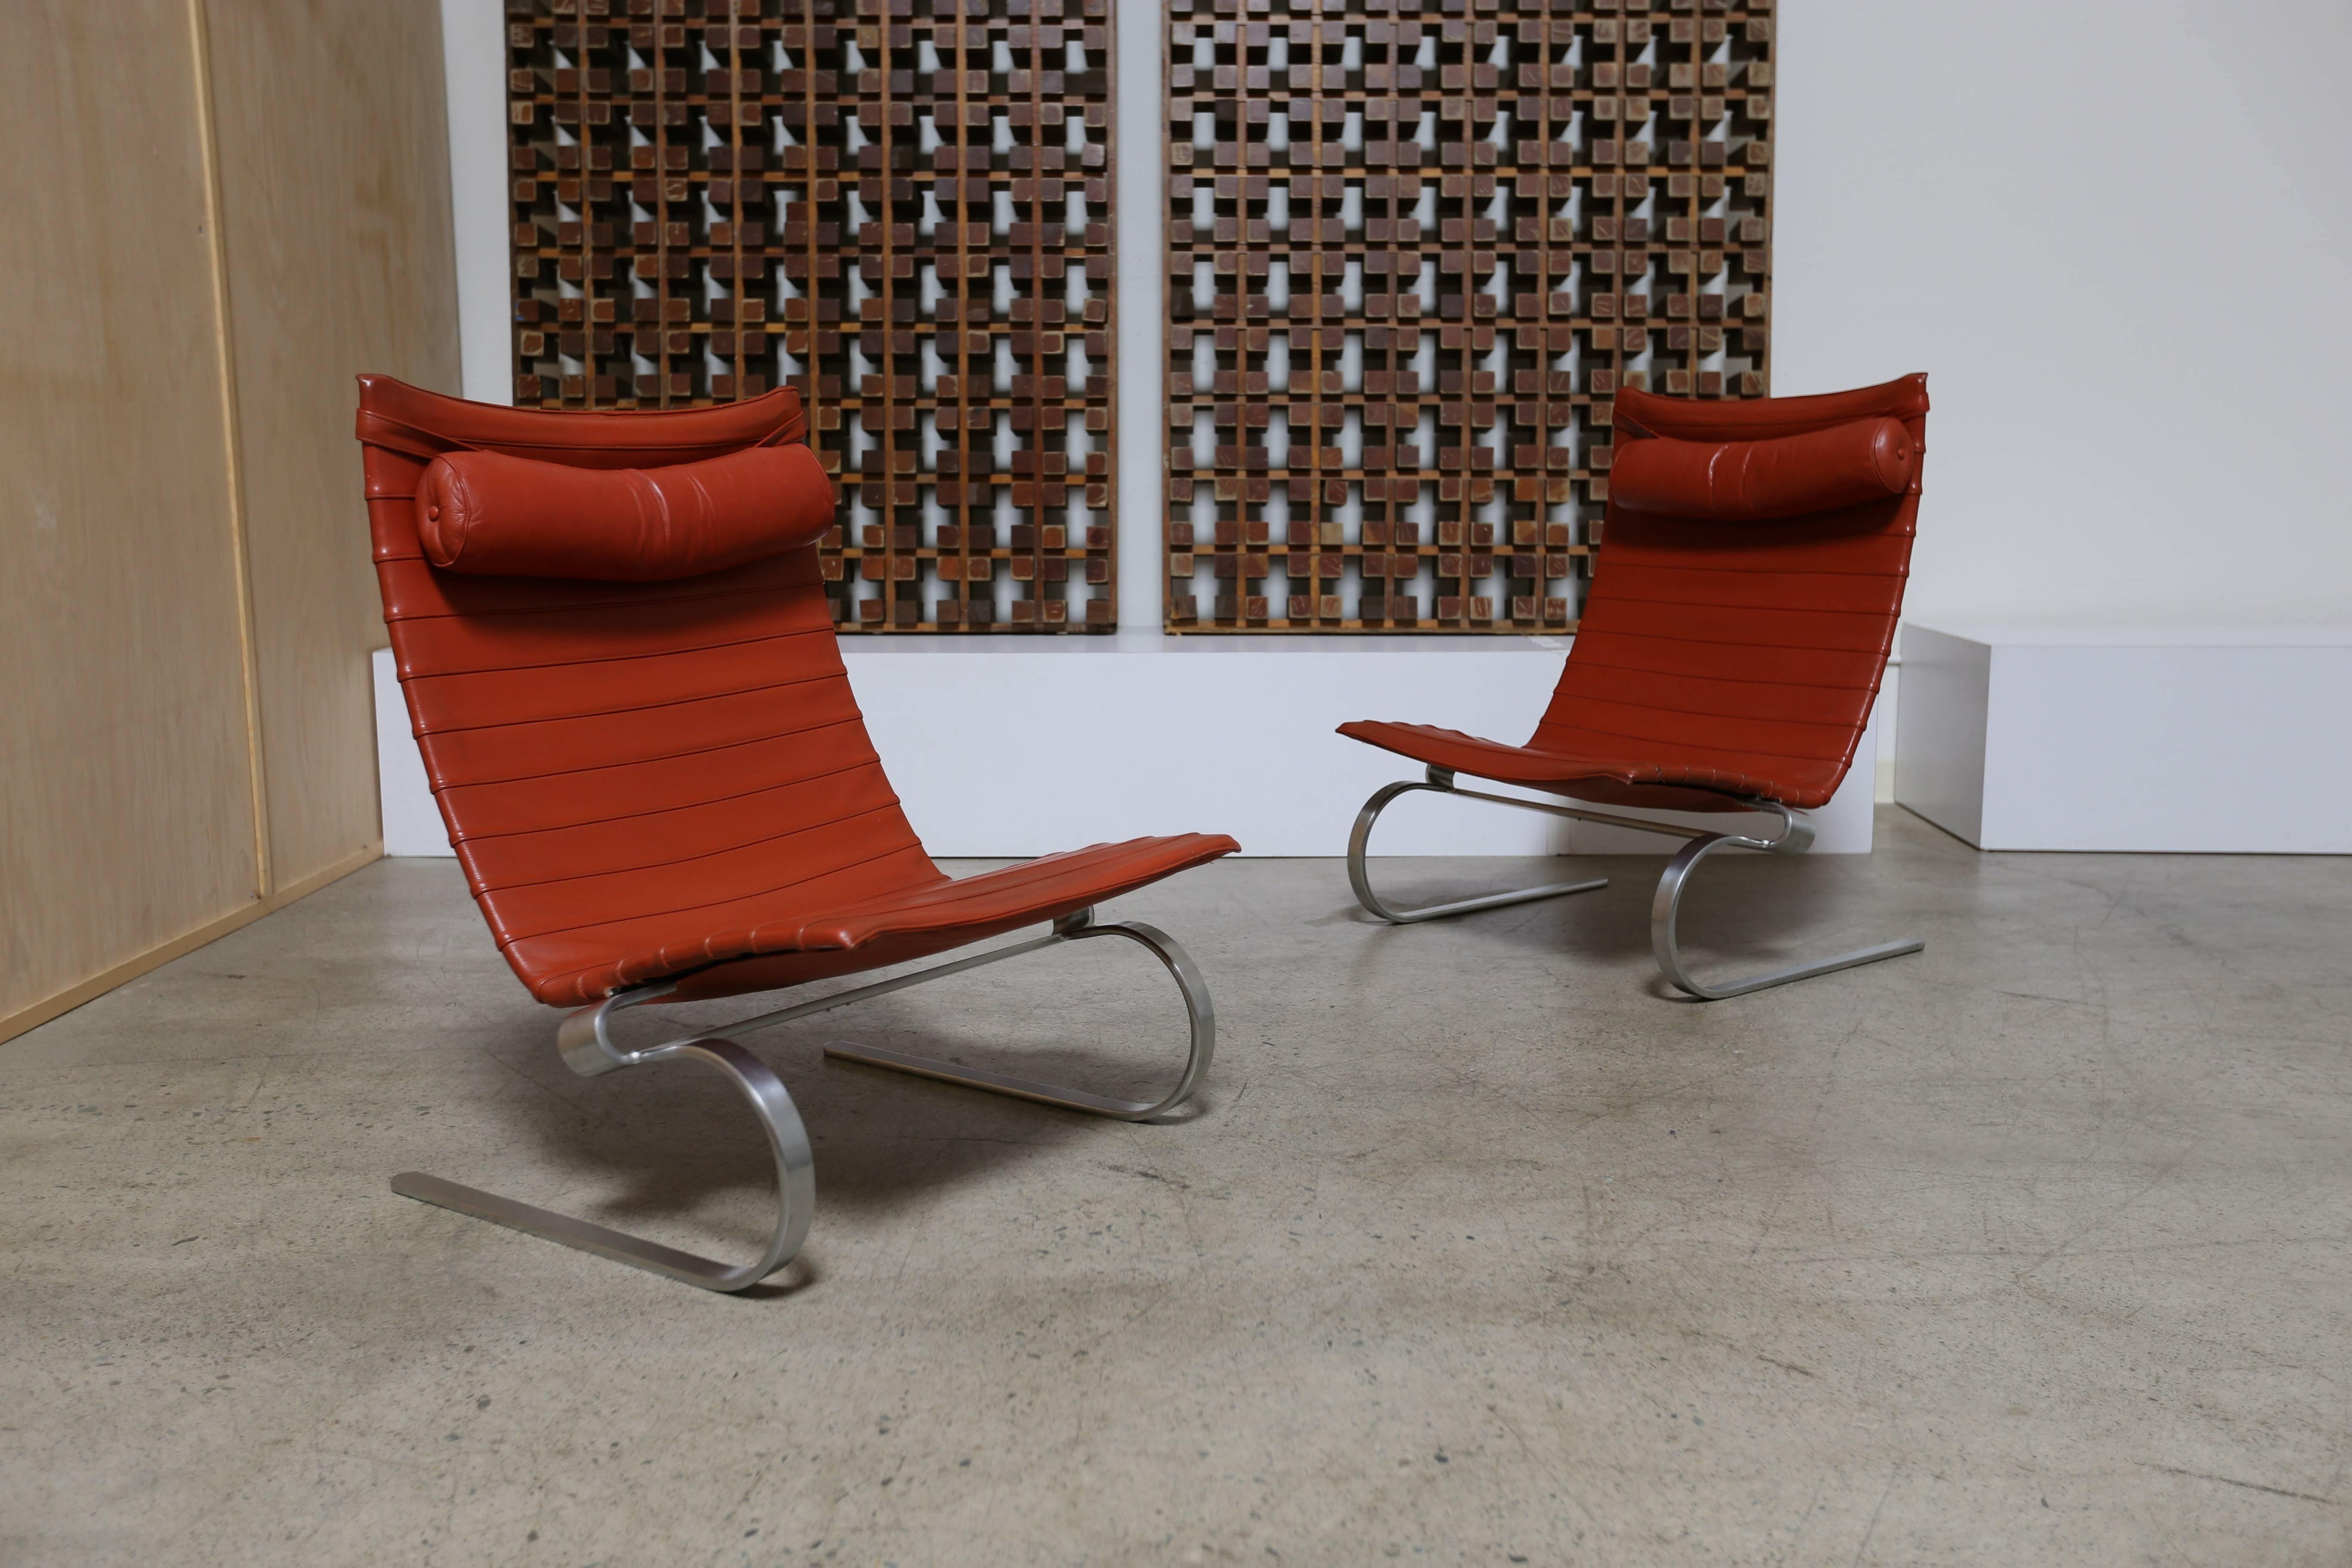 Pair of Poul Kjaerholm pk20 lounge chairs. Manufactured by Fritz Hansen, 1980s. Leather and matte chrome.